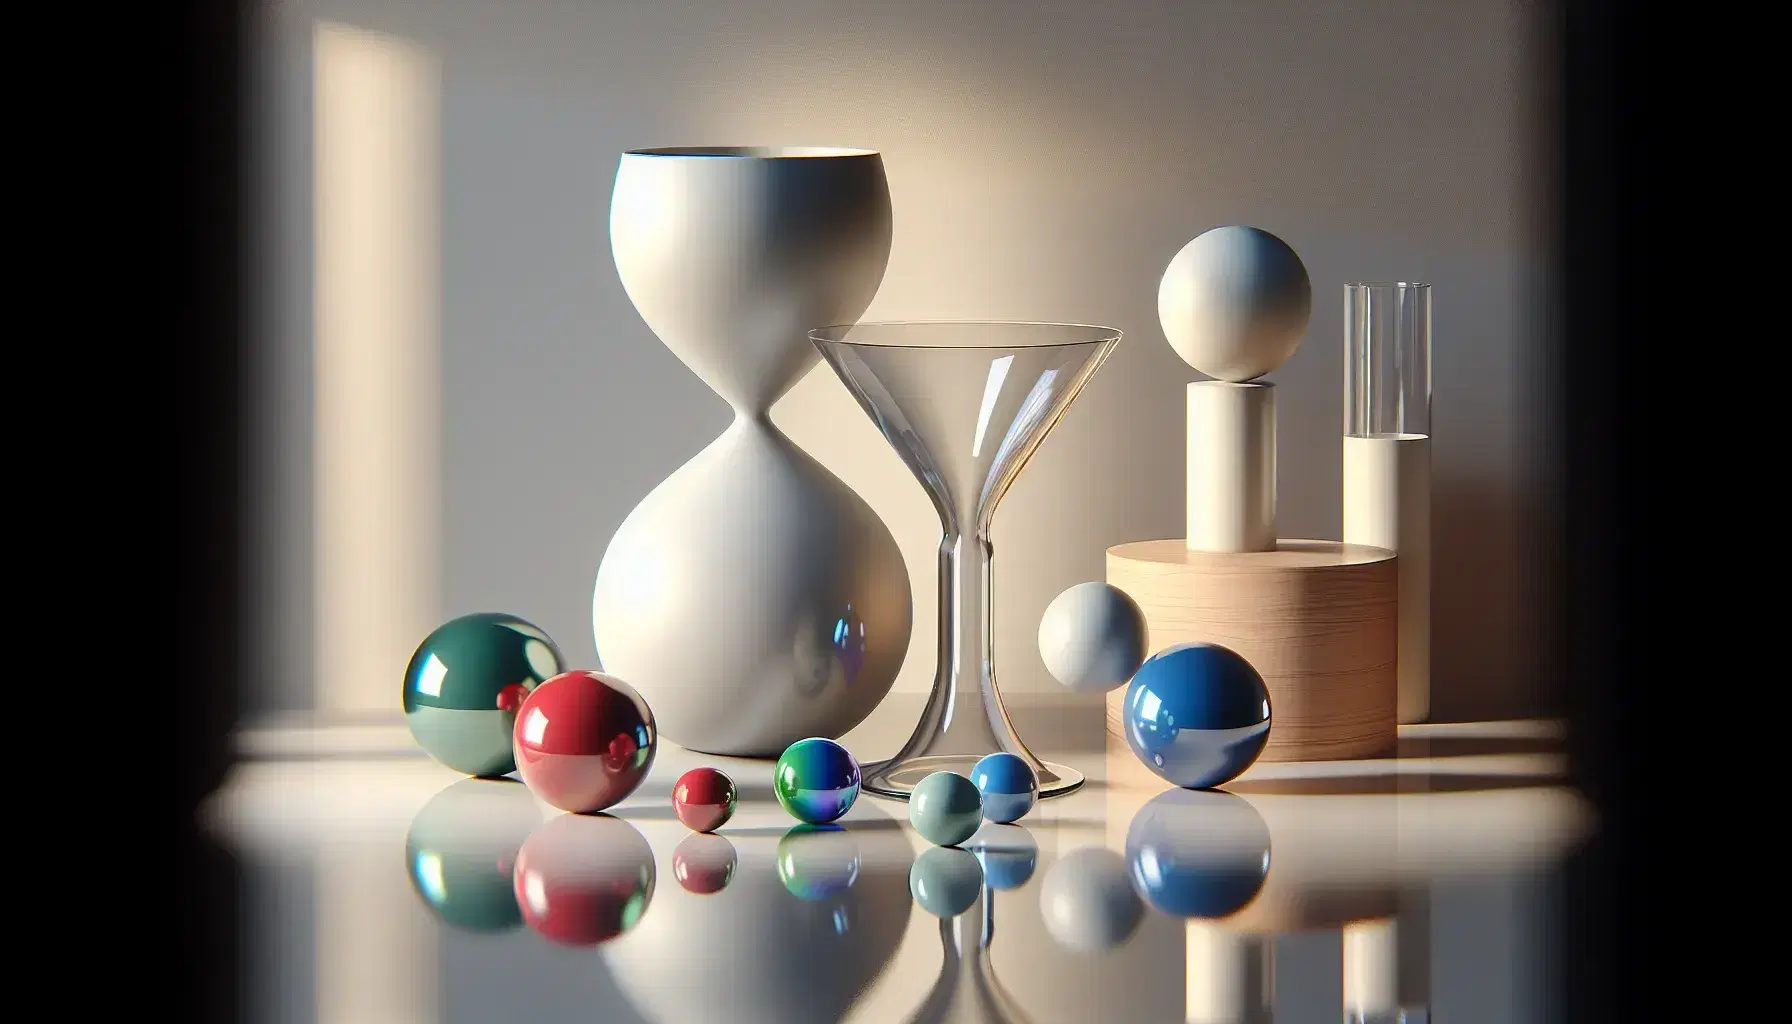 Collection of 3D objects on reflective surface, including a white hourglass-shaped vase, colorful spheres, a transparent wine glass, and a wooden bowl.